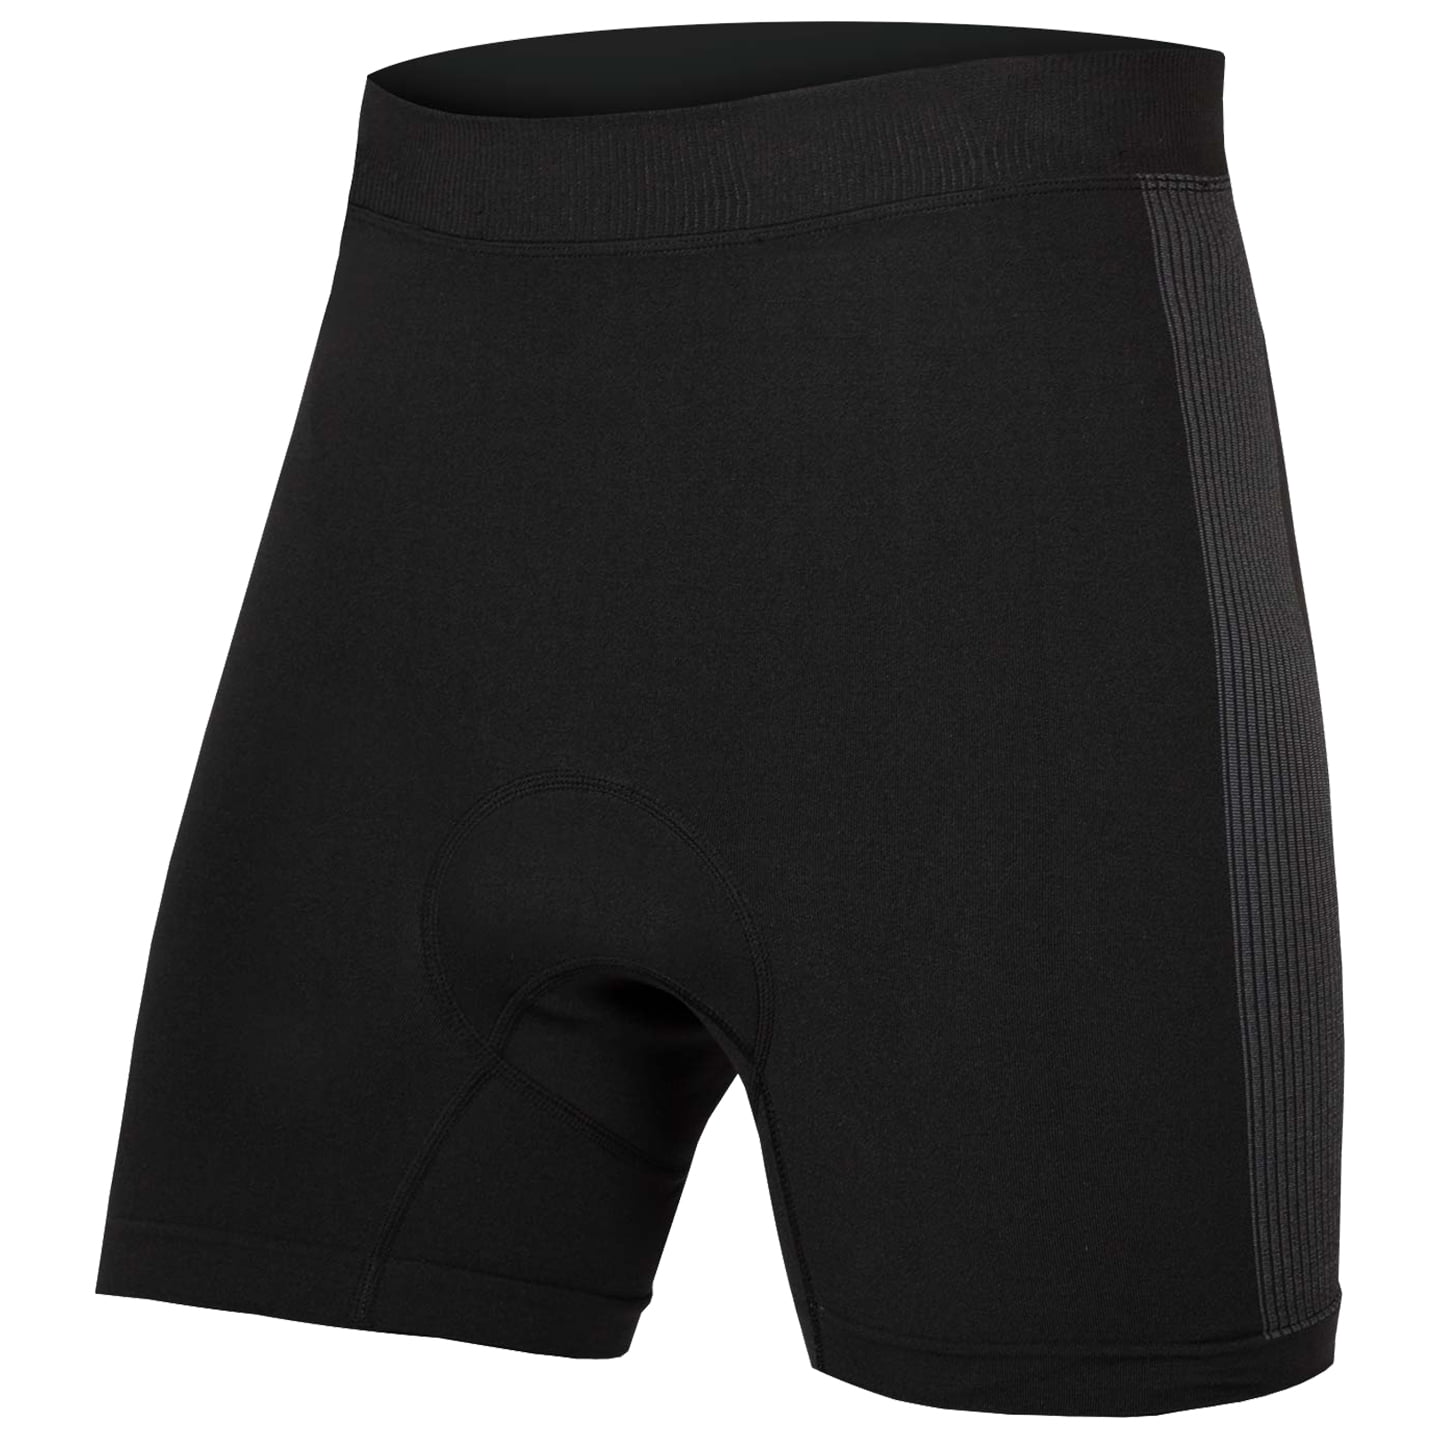 Padded Boxer Shorts, for men, size 2XL, Briefs, Cycle gear